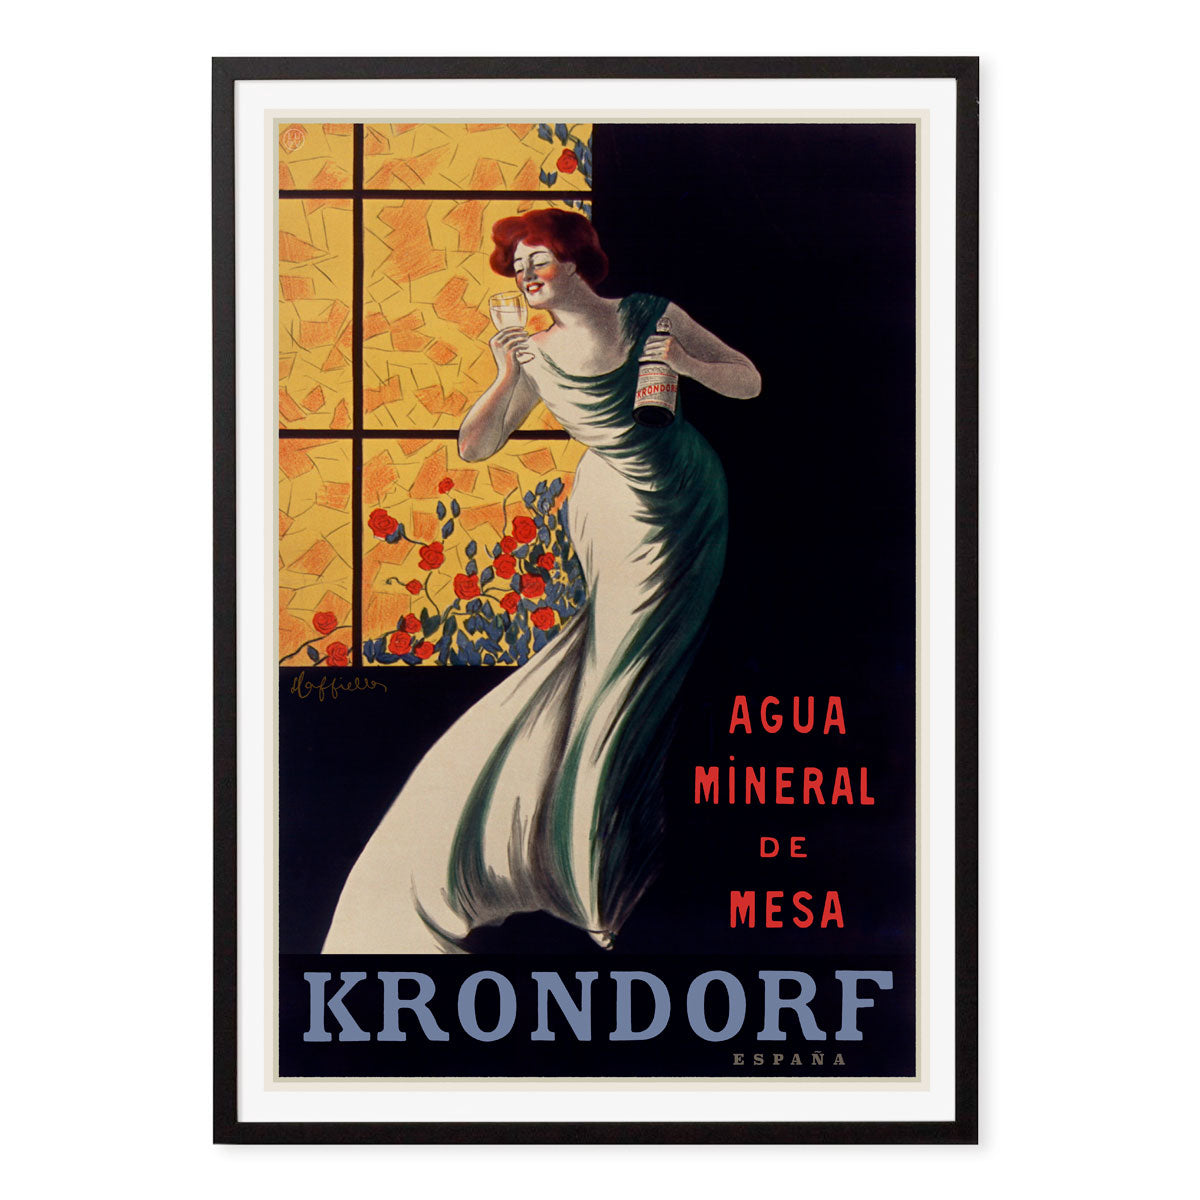 Krondorf retro vintage advertising poster print in black frame from Places We Luv